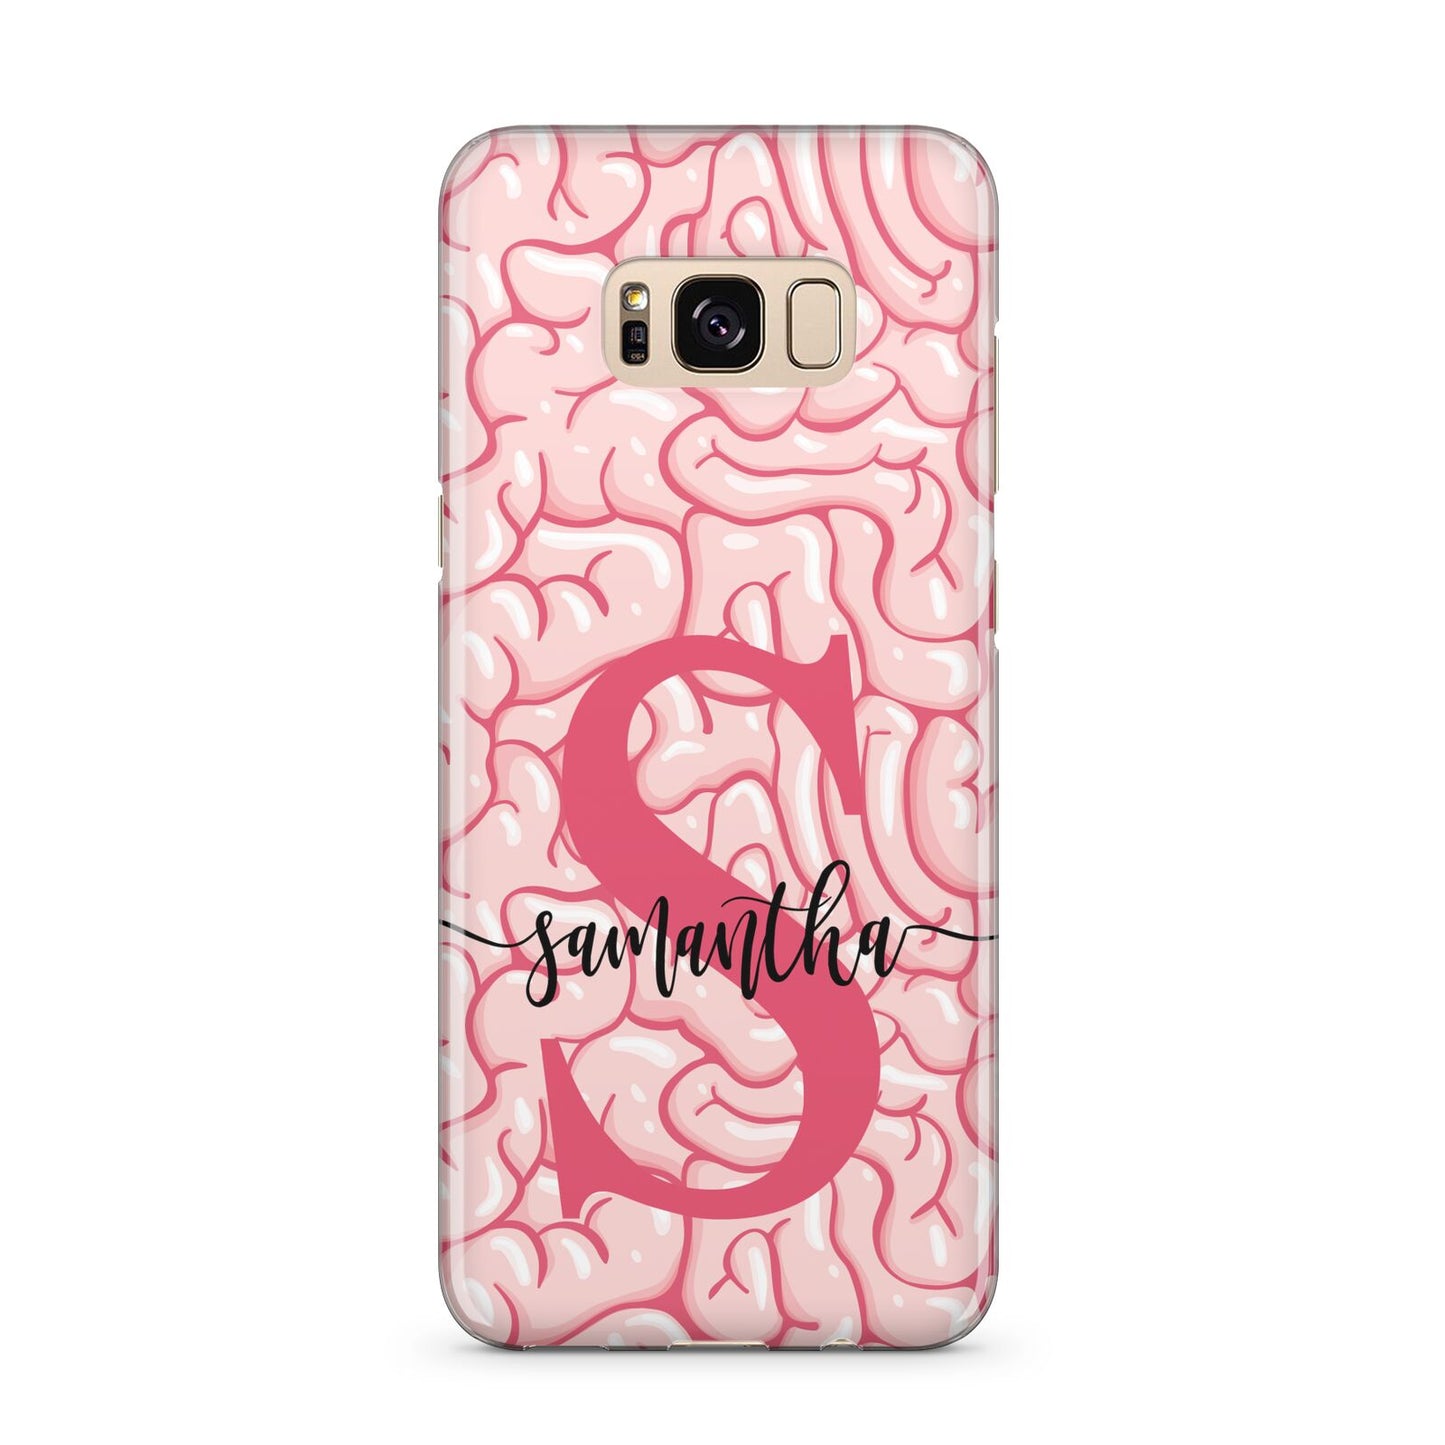 Brain Background with Monogram and Text Samsung Galaxy S8 Plus Case